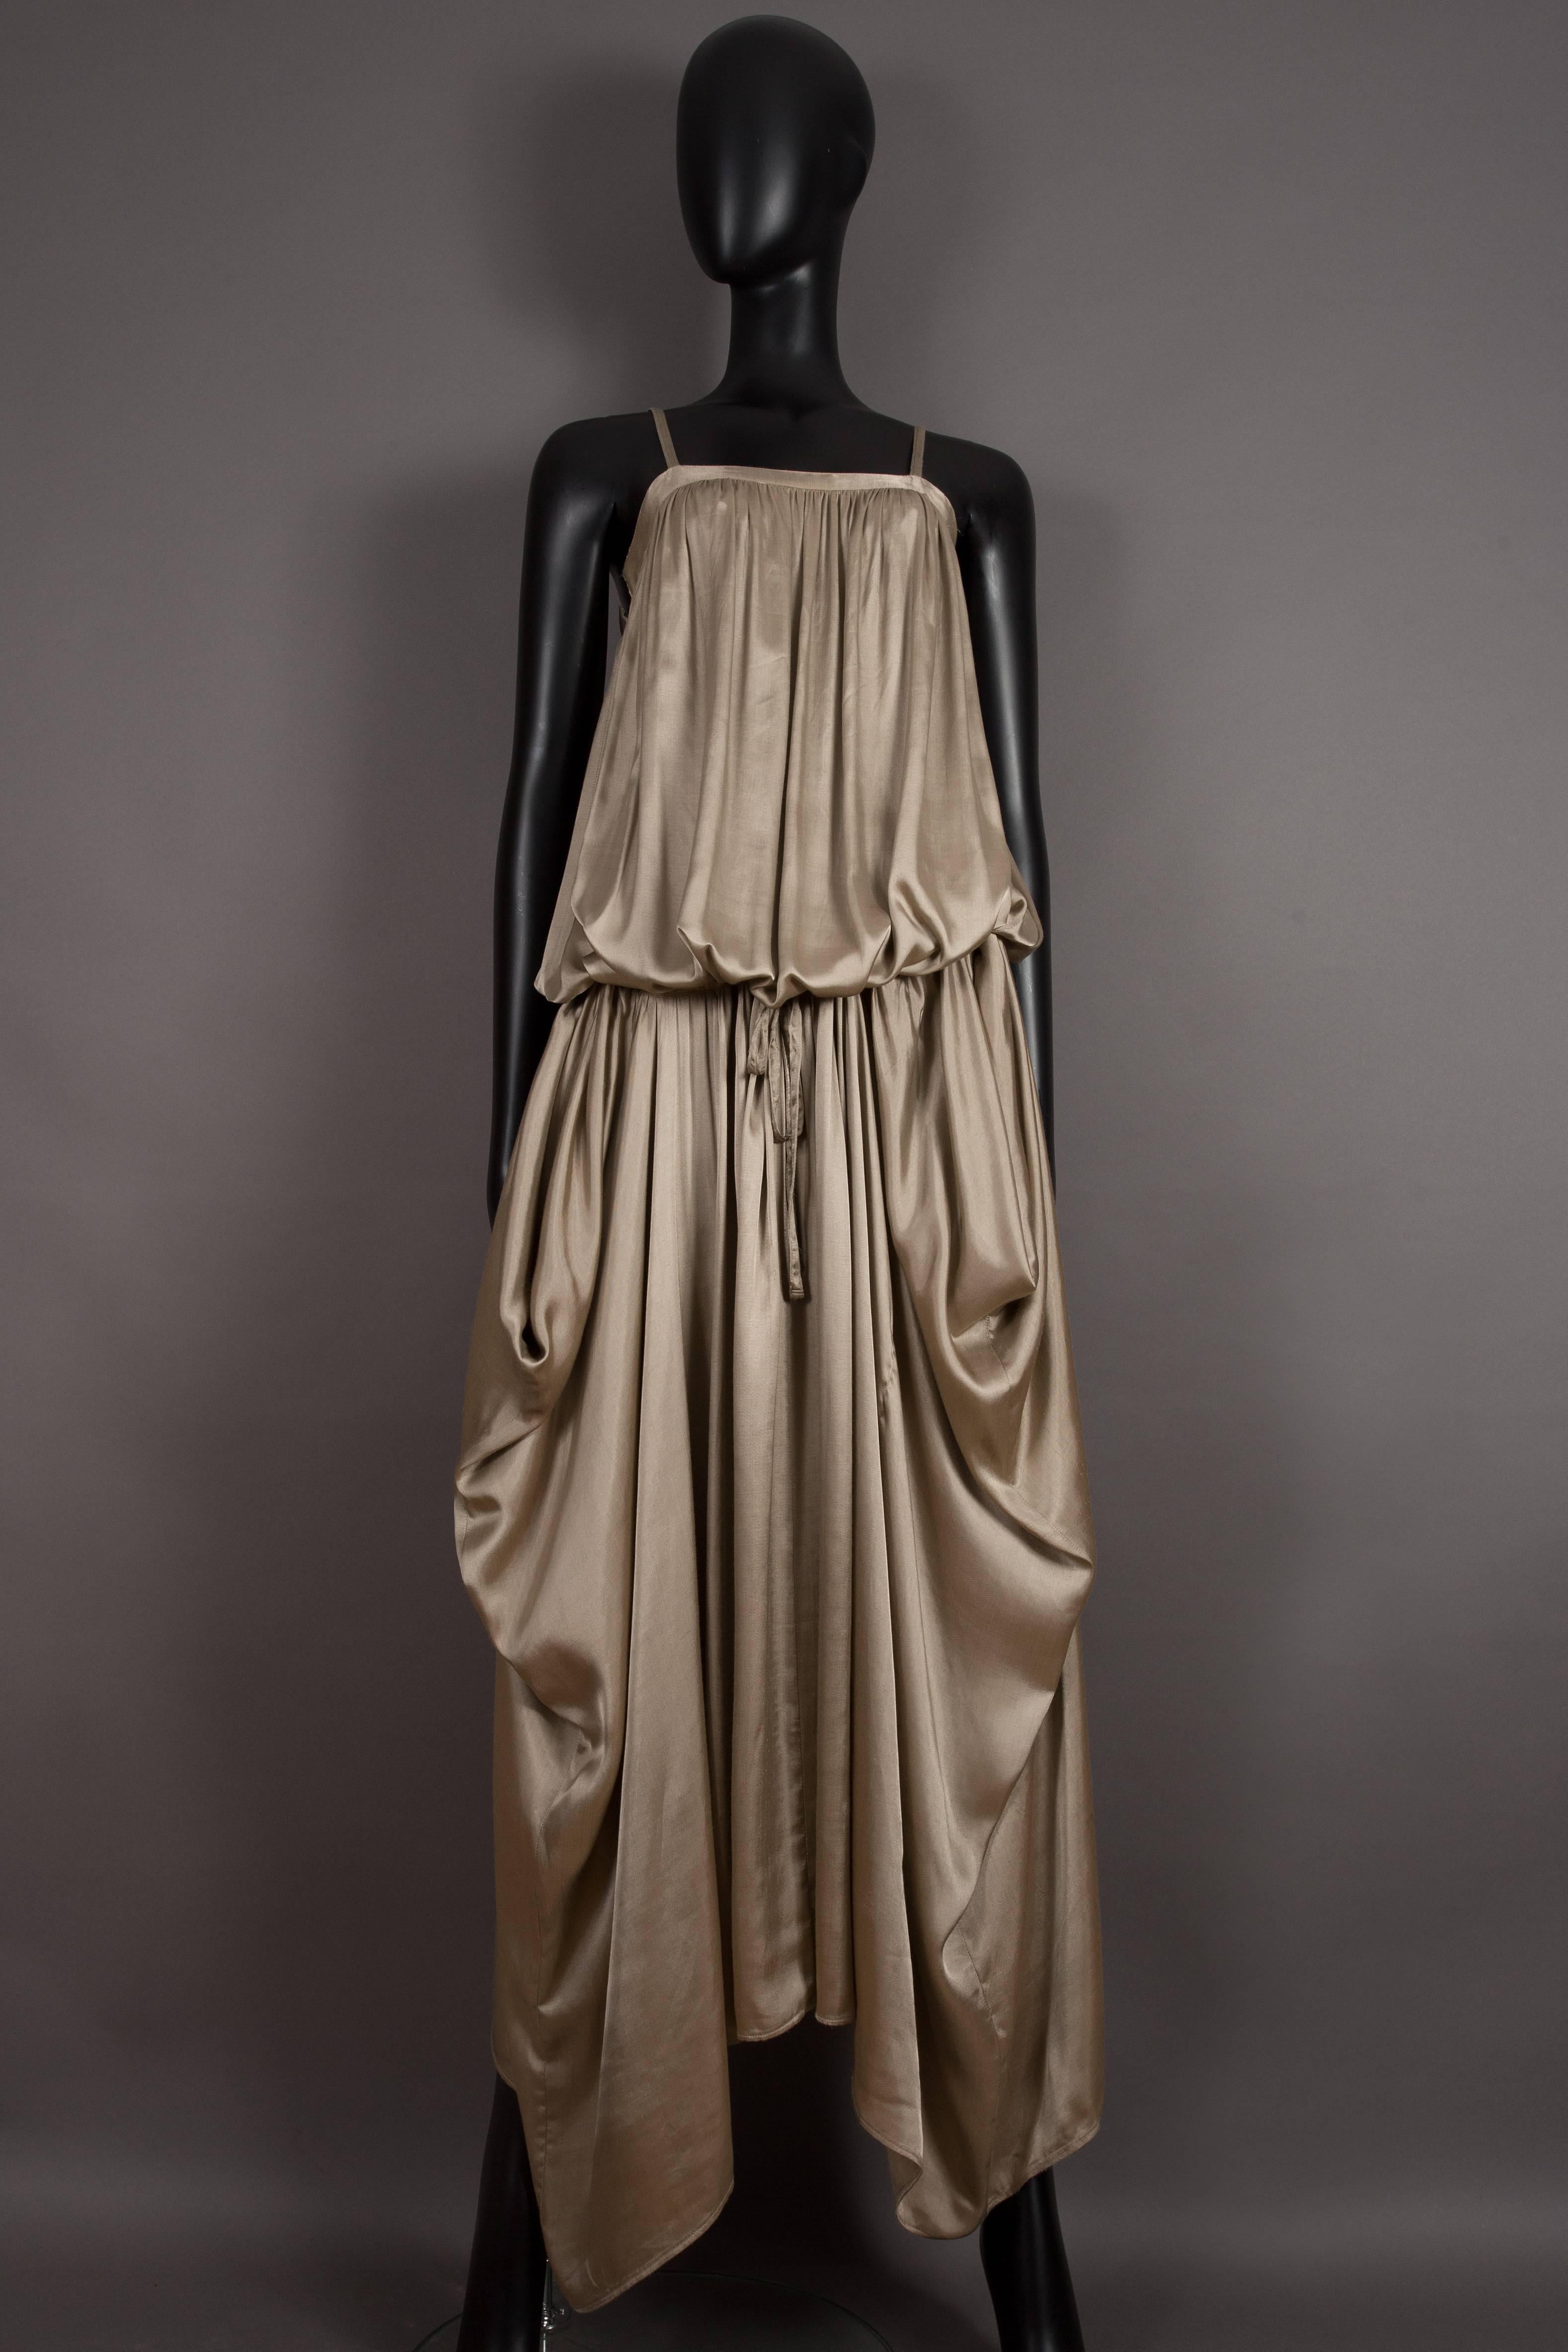 Rare Kenzo Jap taupe viscose evening dress, circa 1977. The dress features masses of pleated fabric, spaghetti straps, two hidden side pockets and an adjustable drawstring waist which can be styled in numerous ways. 